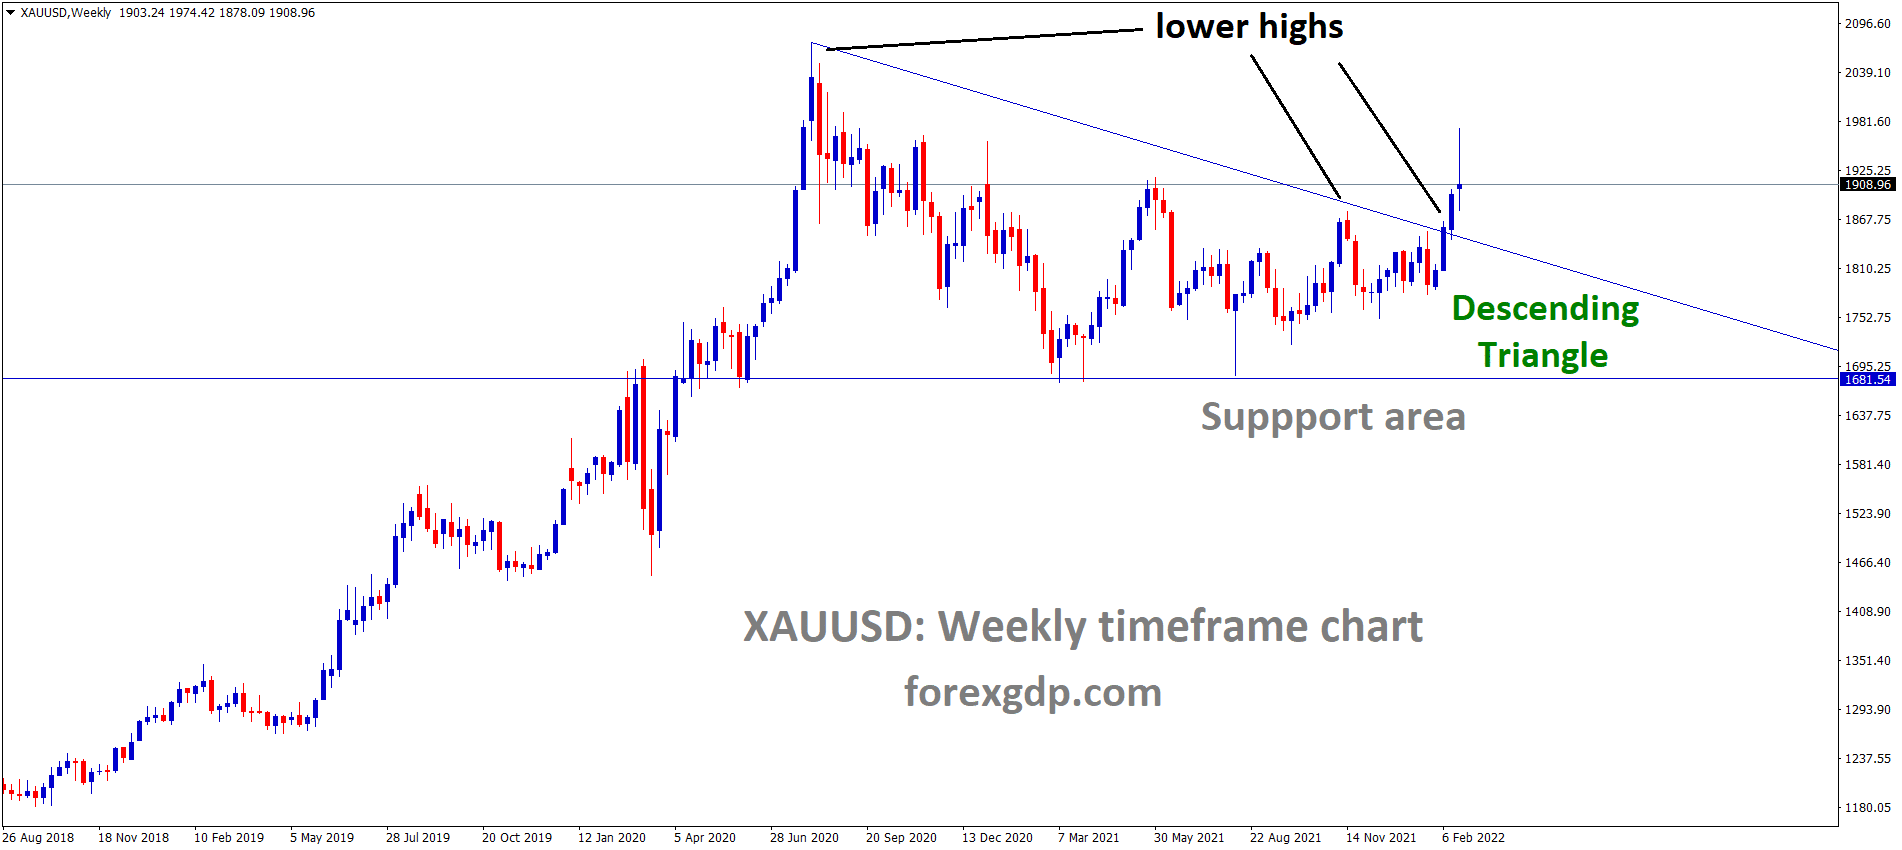 XAUUSD Gold price has reached the lower high area of the Descending triangle pattern.